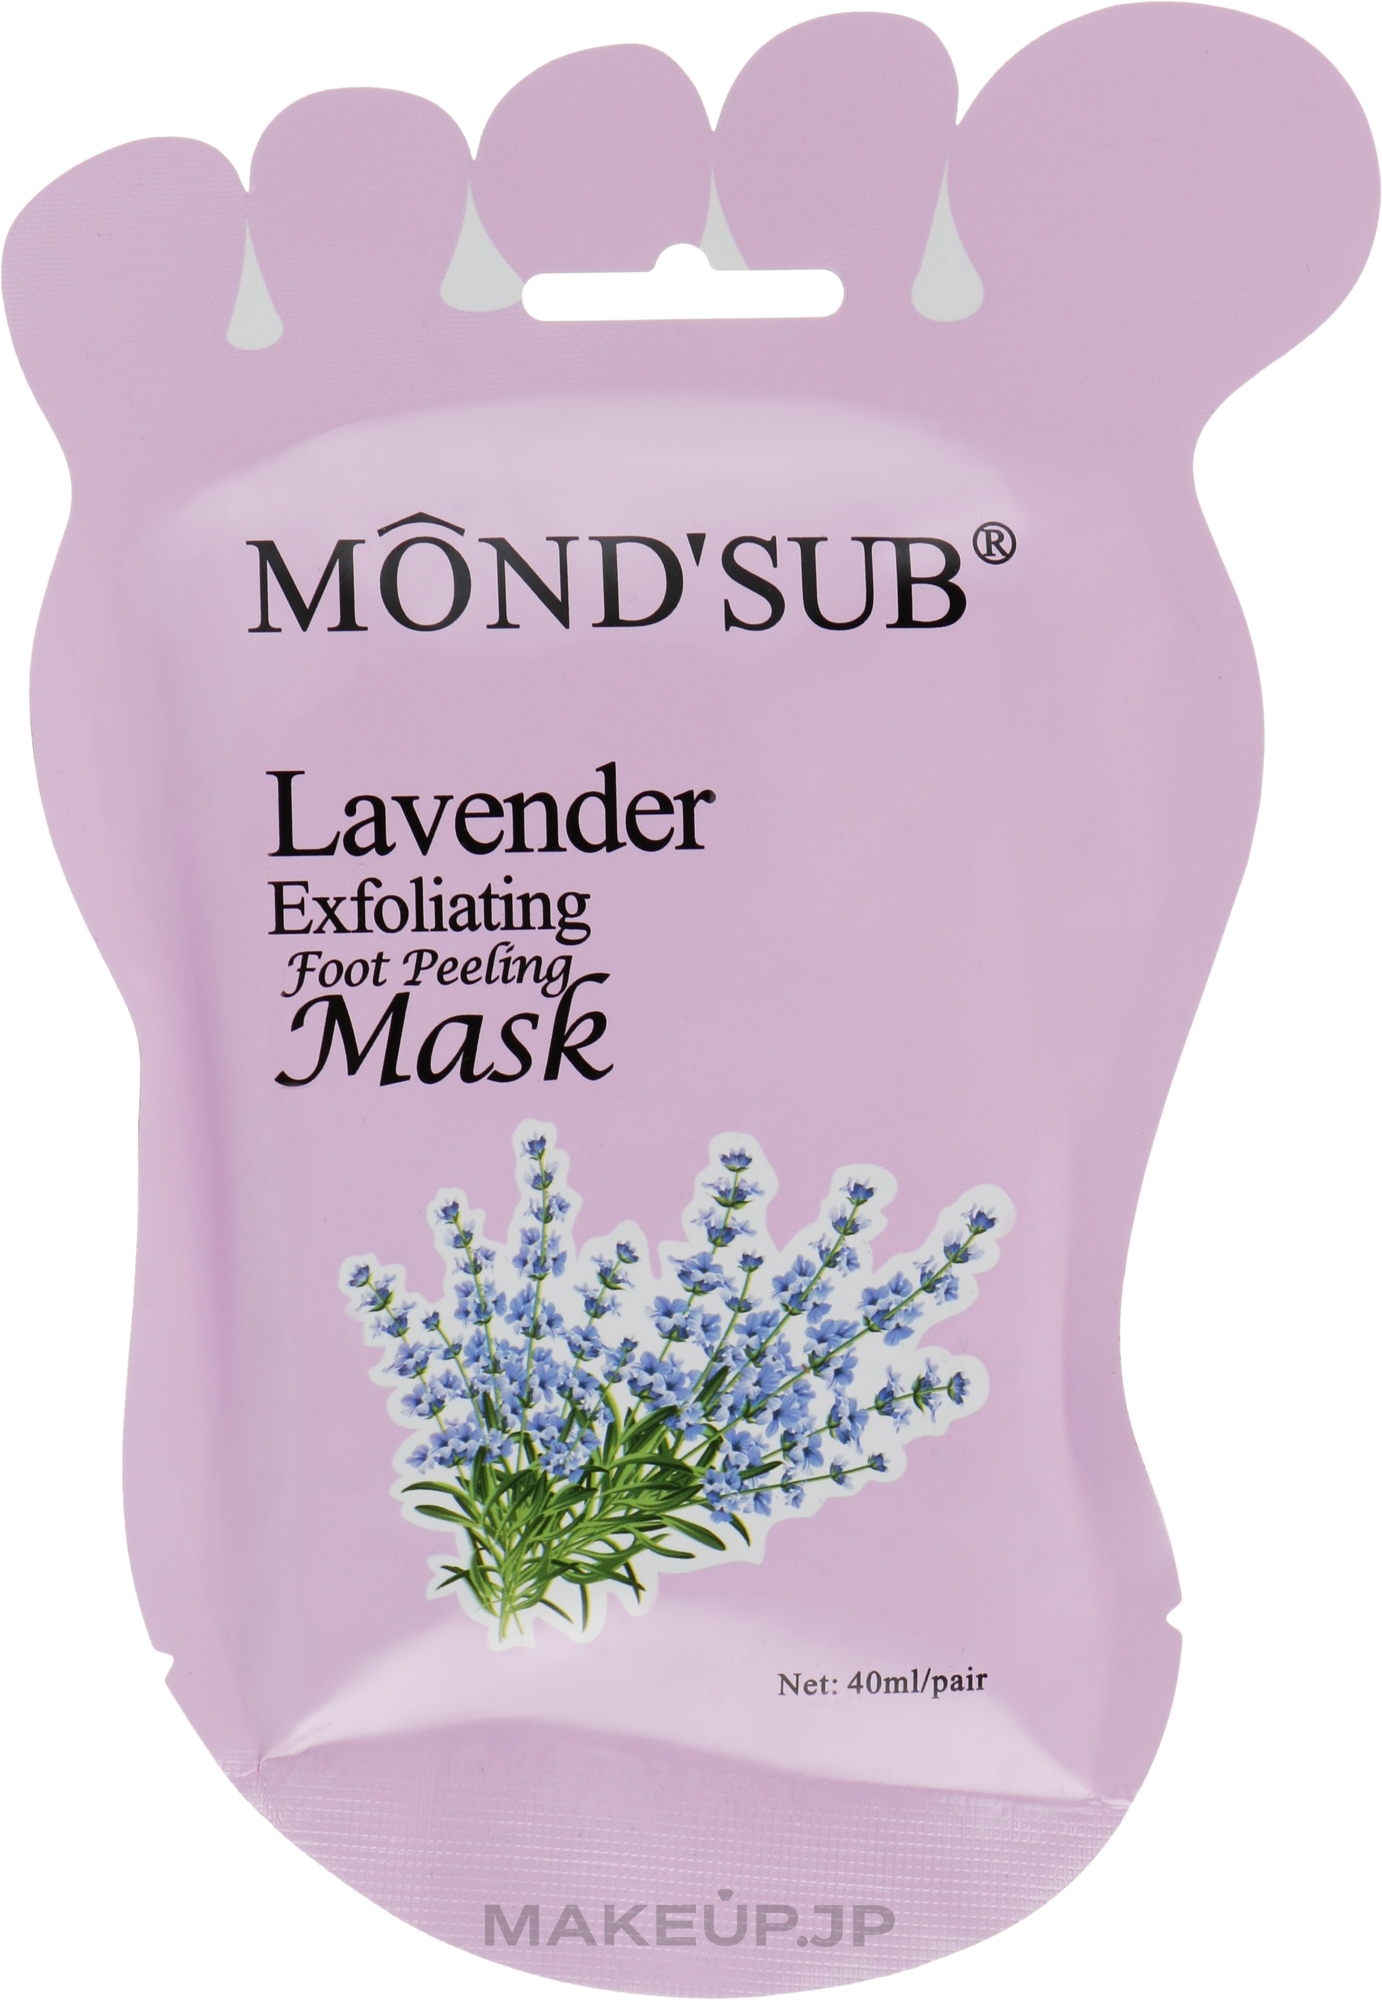 Exfoliating Foot Peeling Mask with Lavender Extract - Mond'Sub Lavender Exfoliating Foot Peeling Mask — photo 40 ml